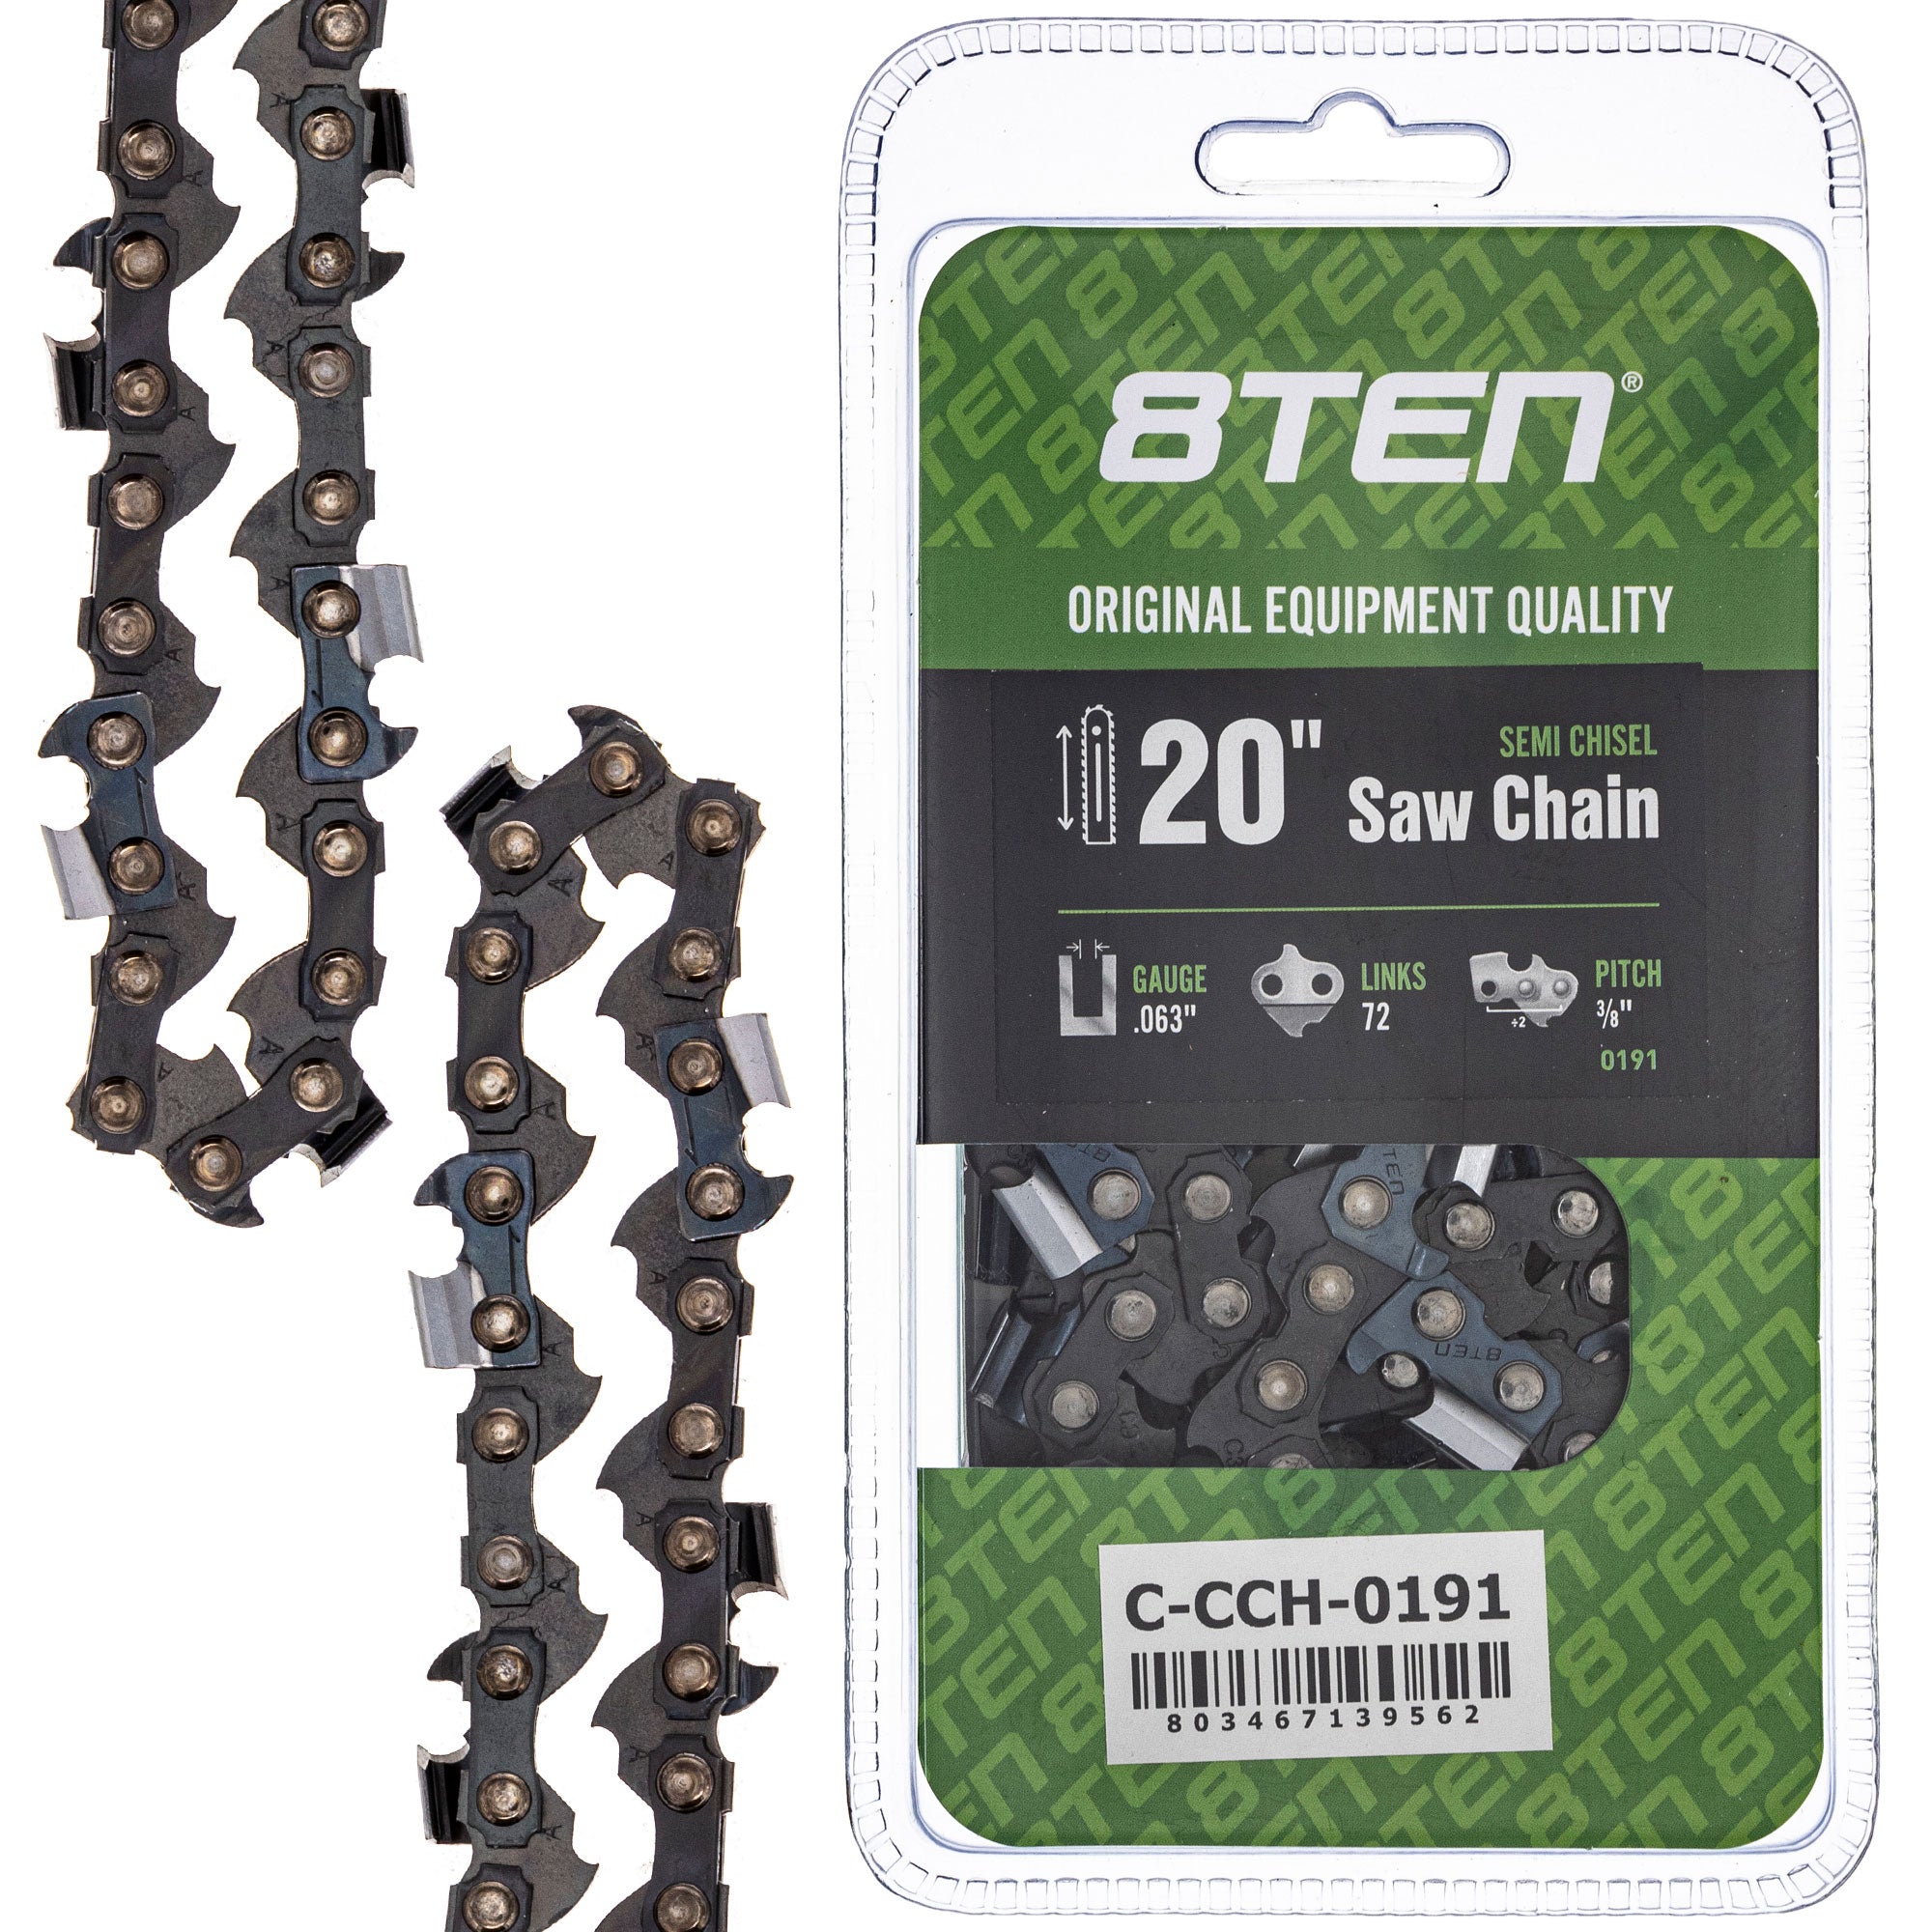 8TEN MK1010338 Guide Bar & Chain for MSE MS E 066